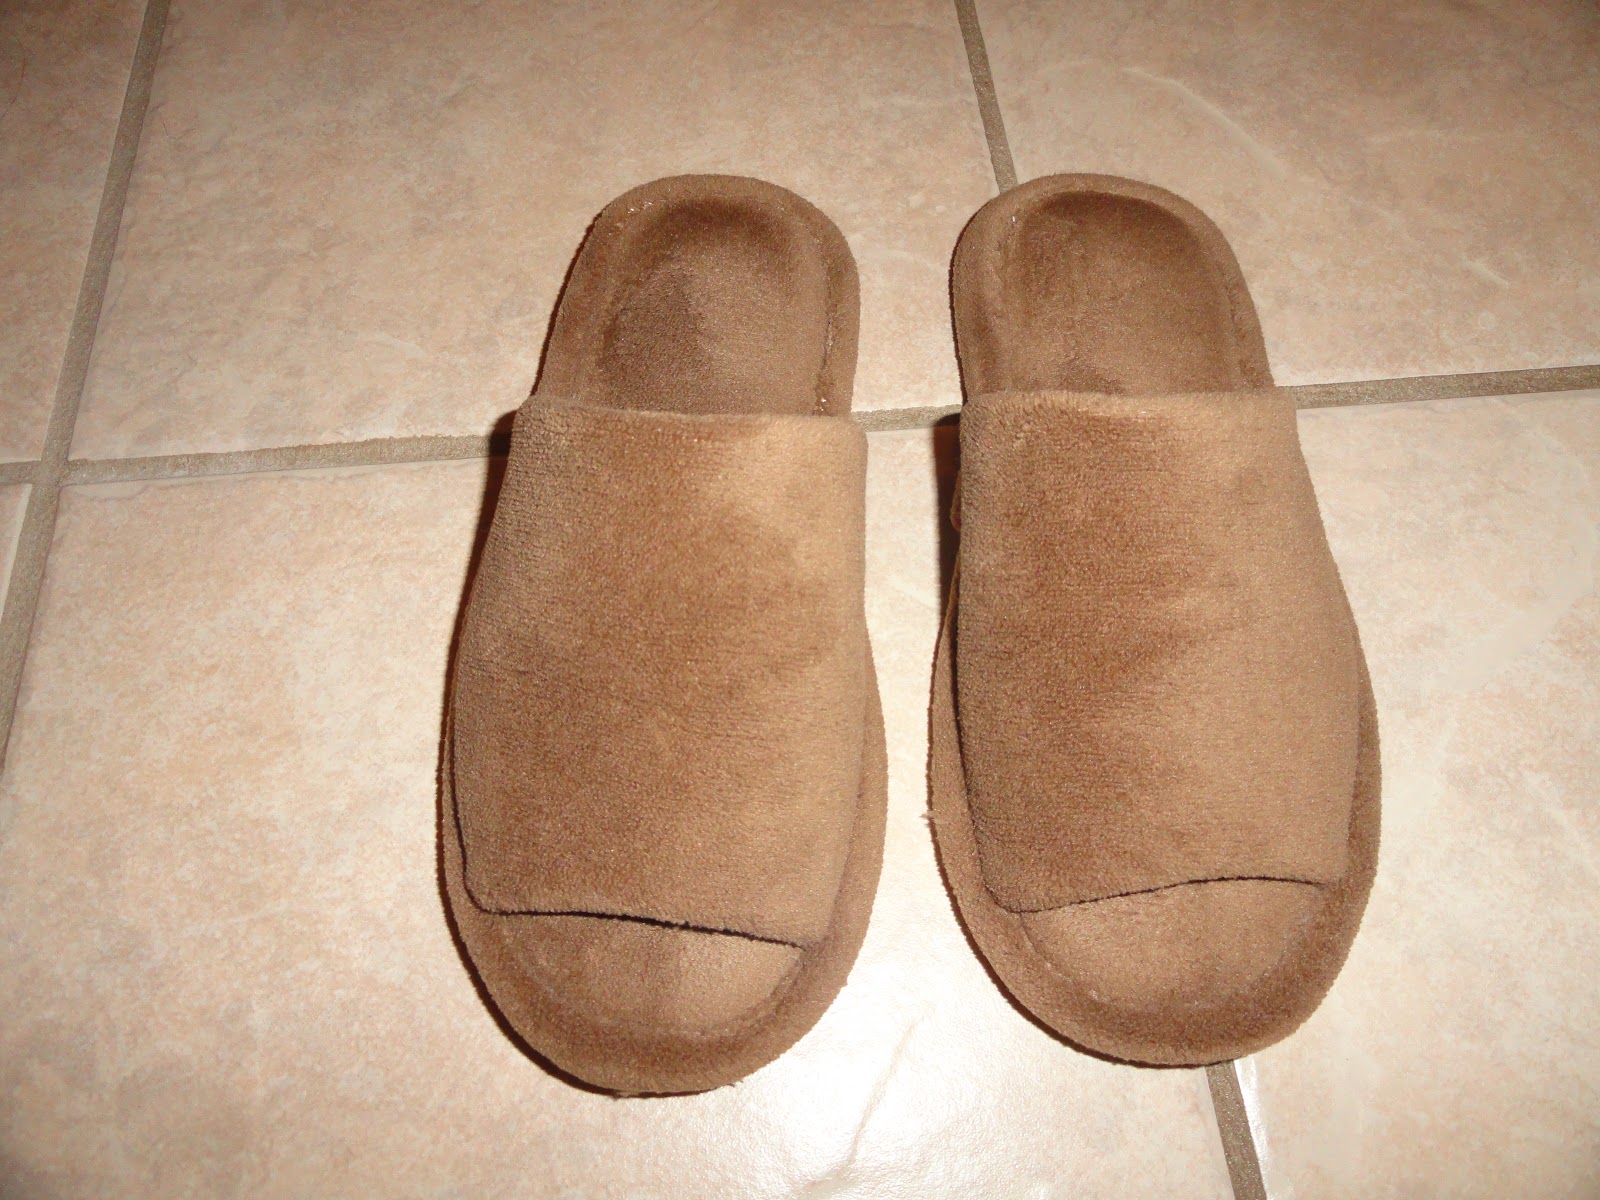 Steph's MN Life: Nature's Sleep Memory Foam Slippers Review